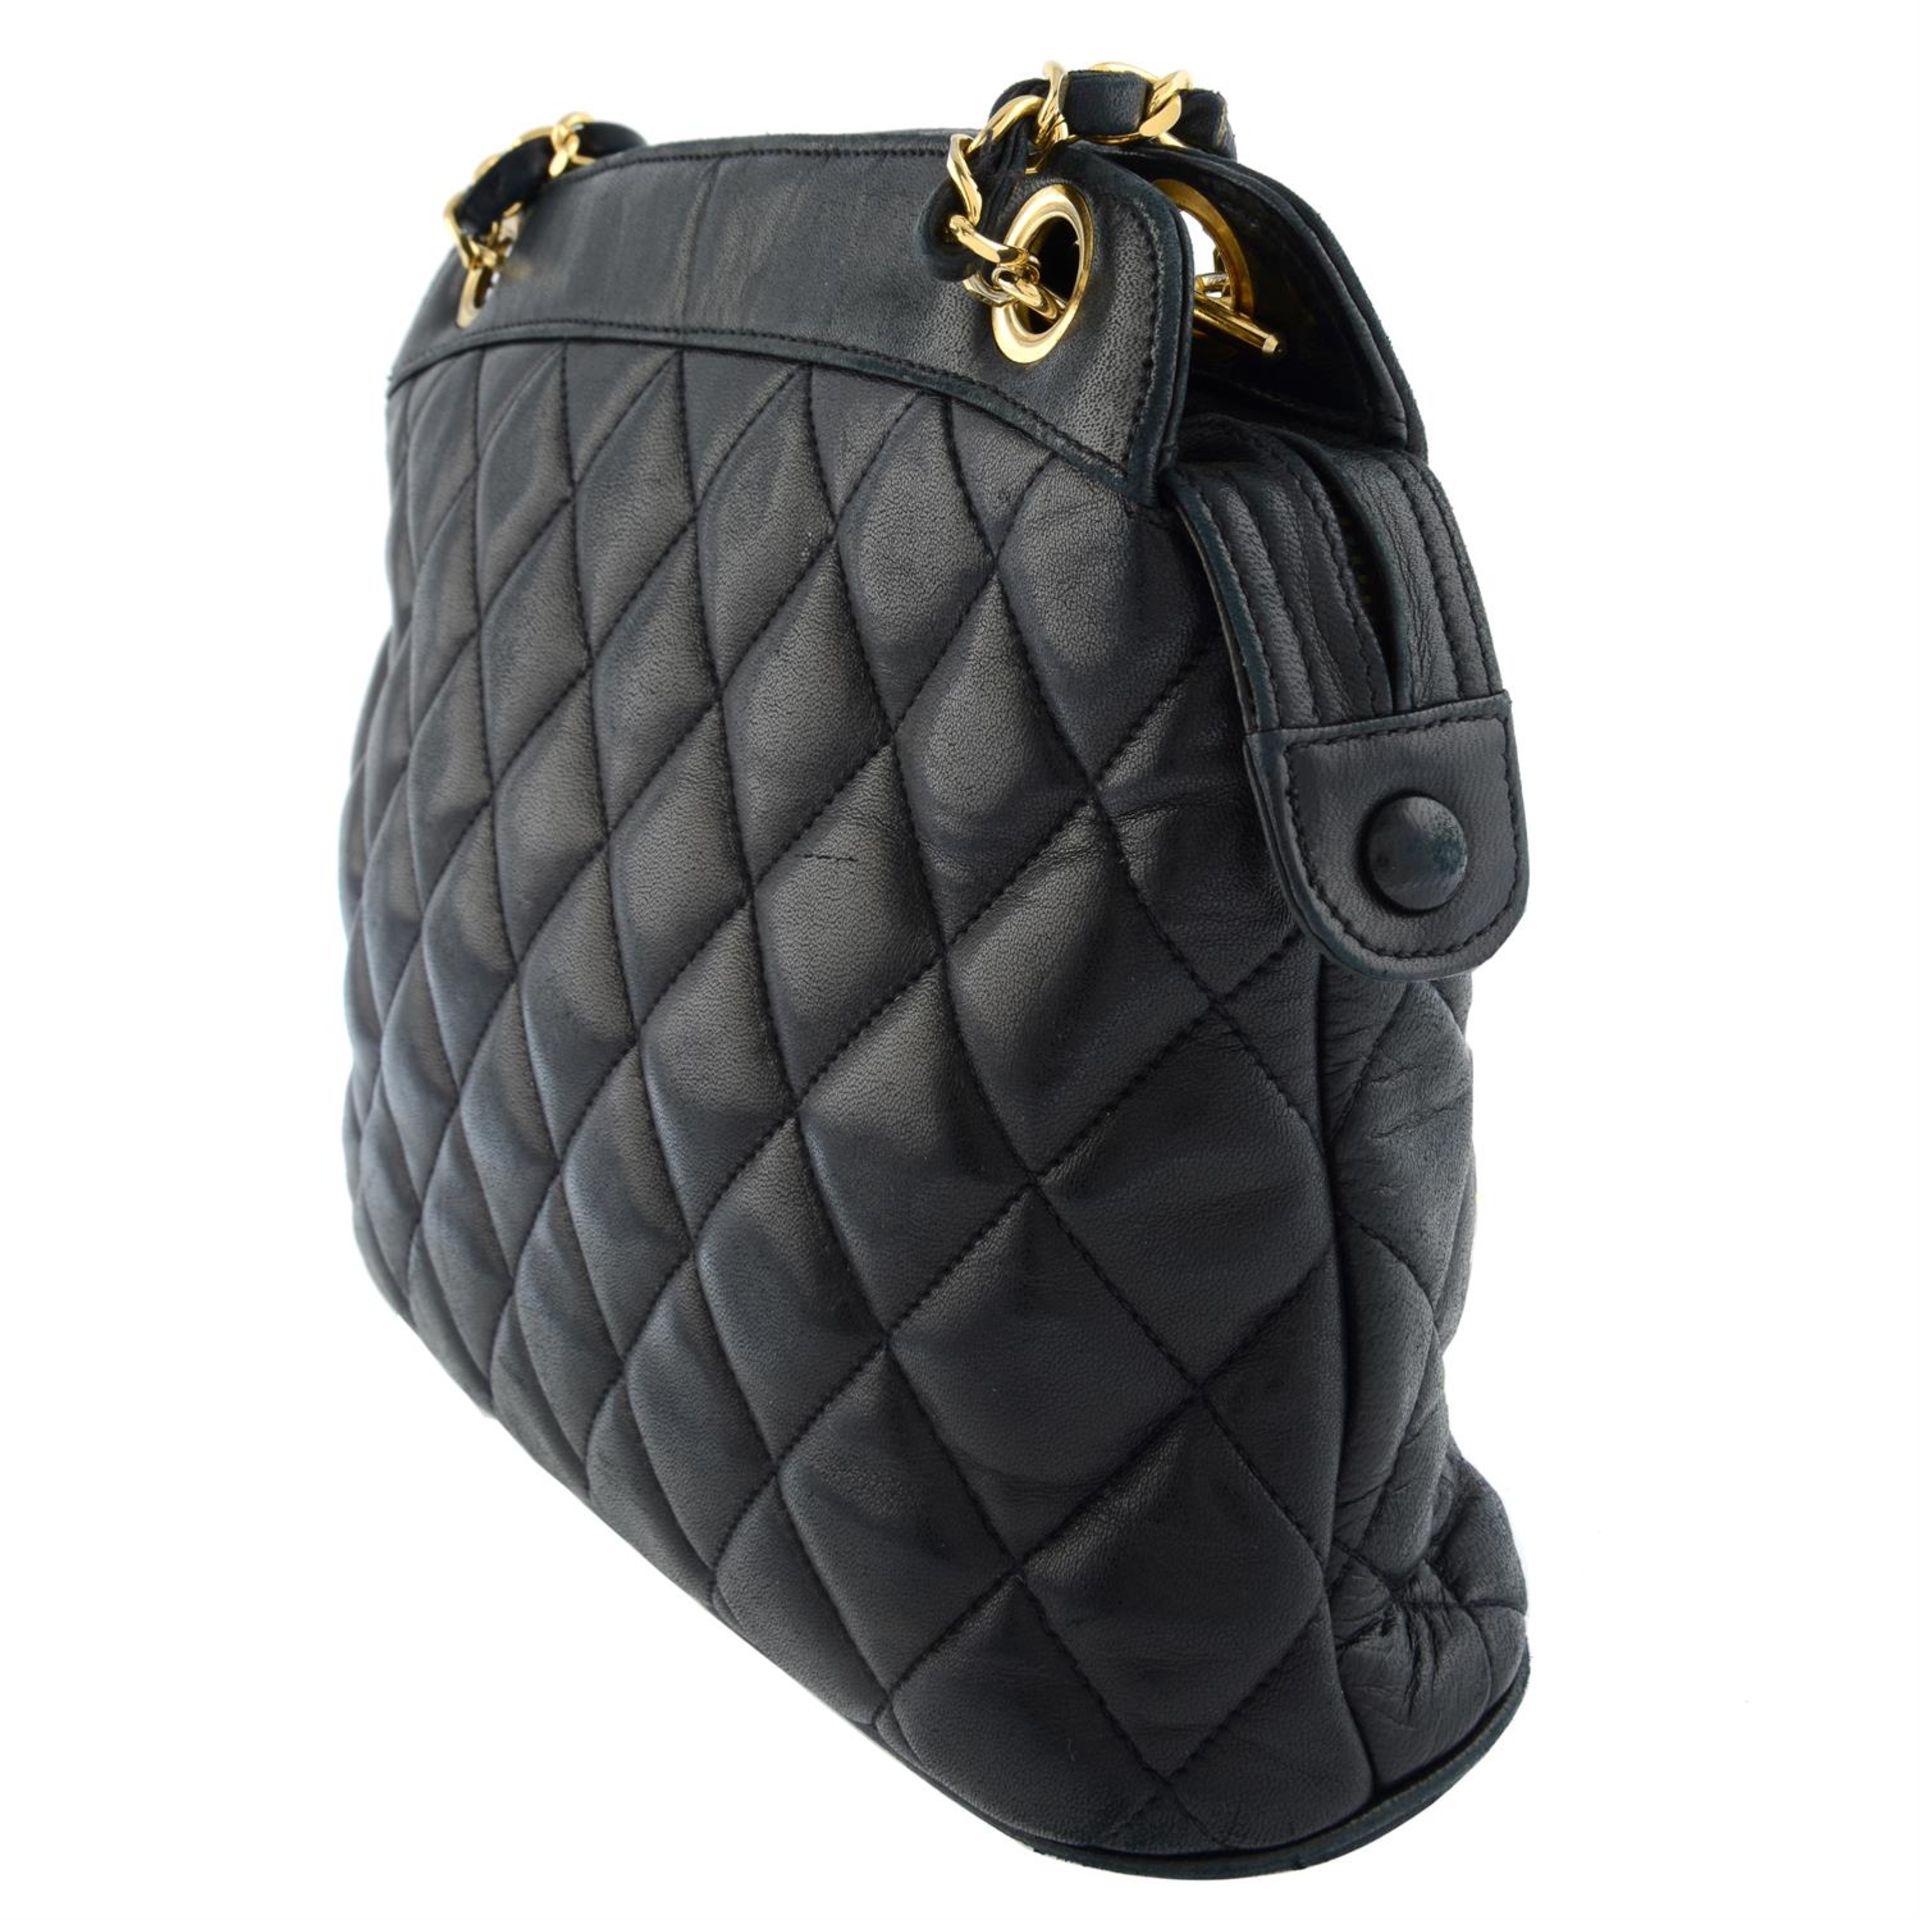 Chanel - quilted crossbody bag. - Image 3 of 4